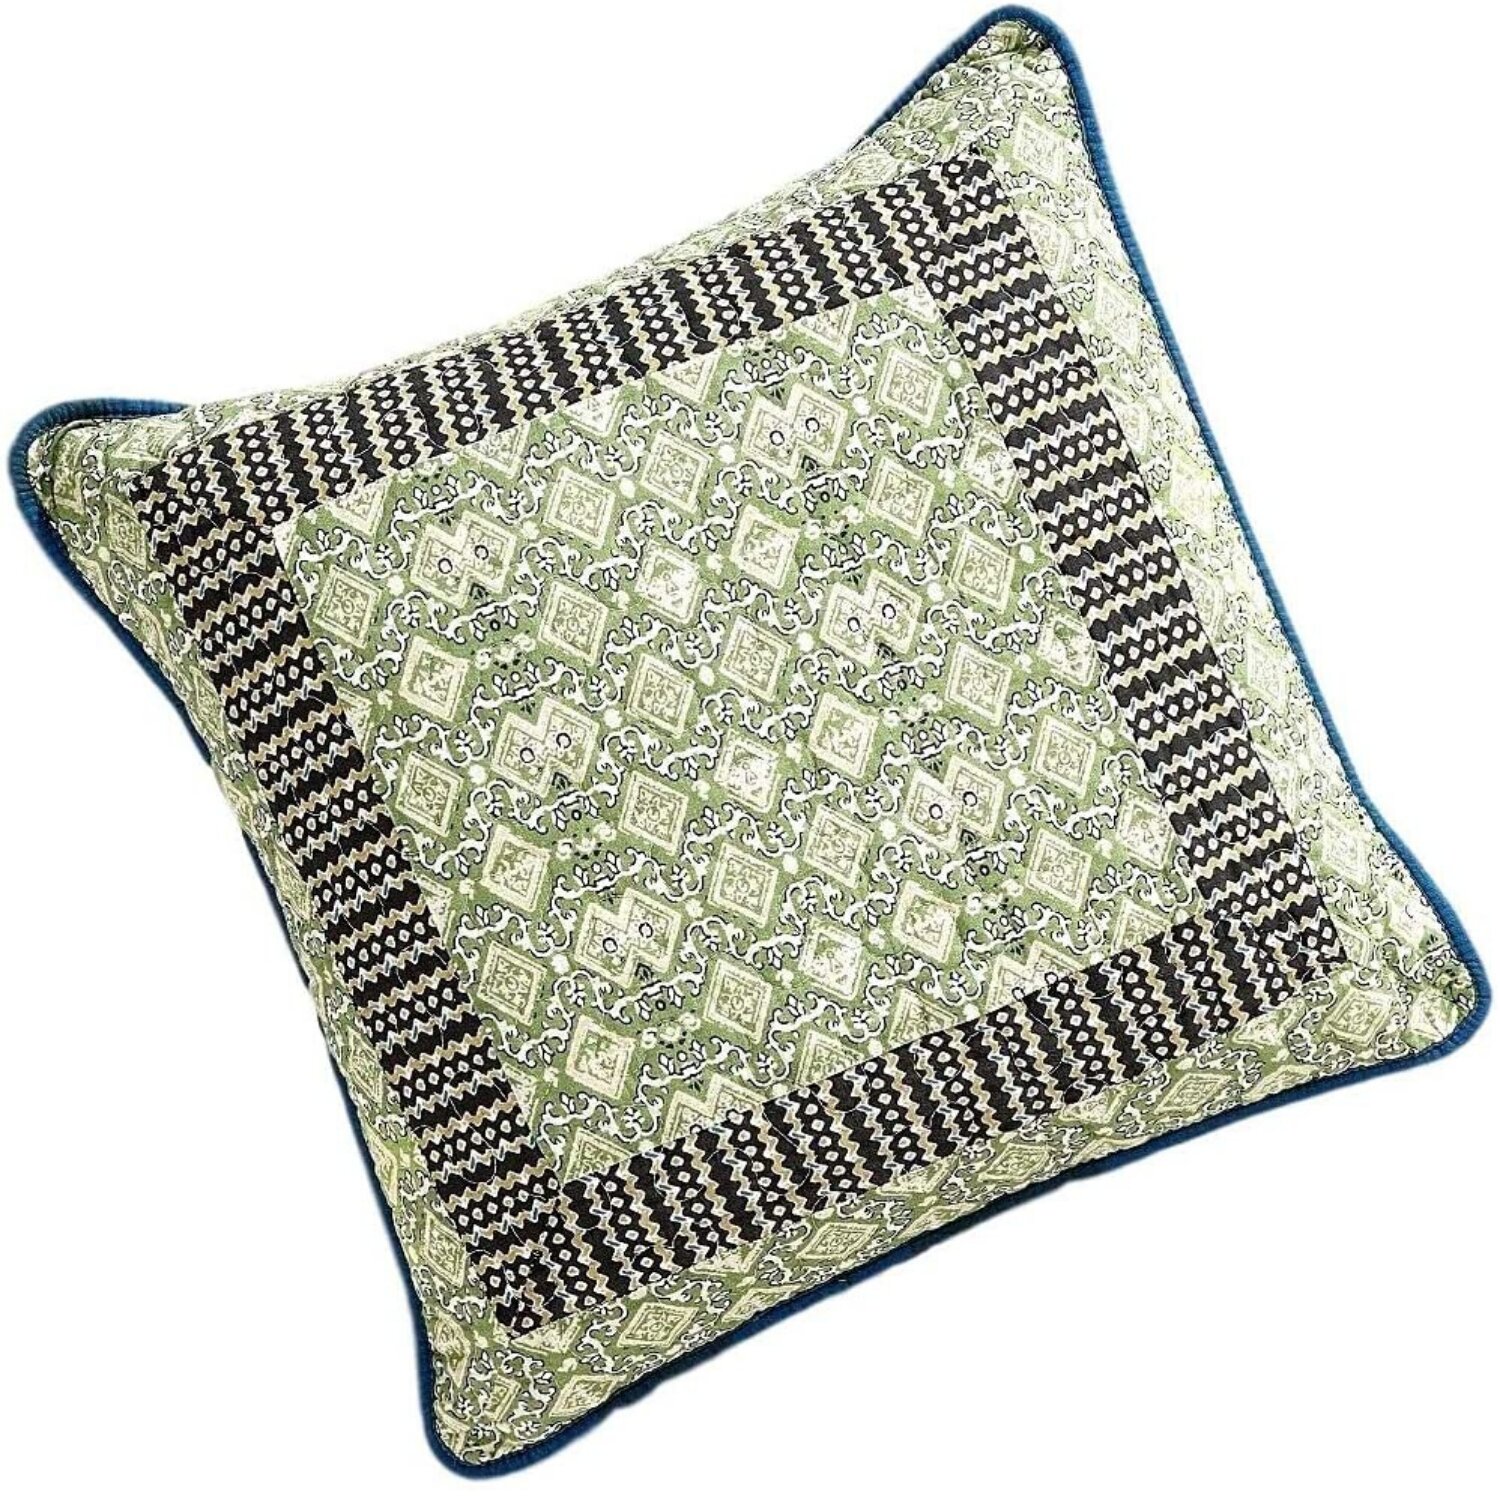 The Pillow Collection Abital Ikat Throw Pillow Cover 